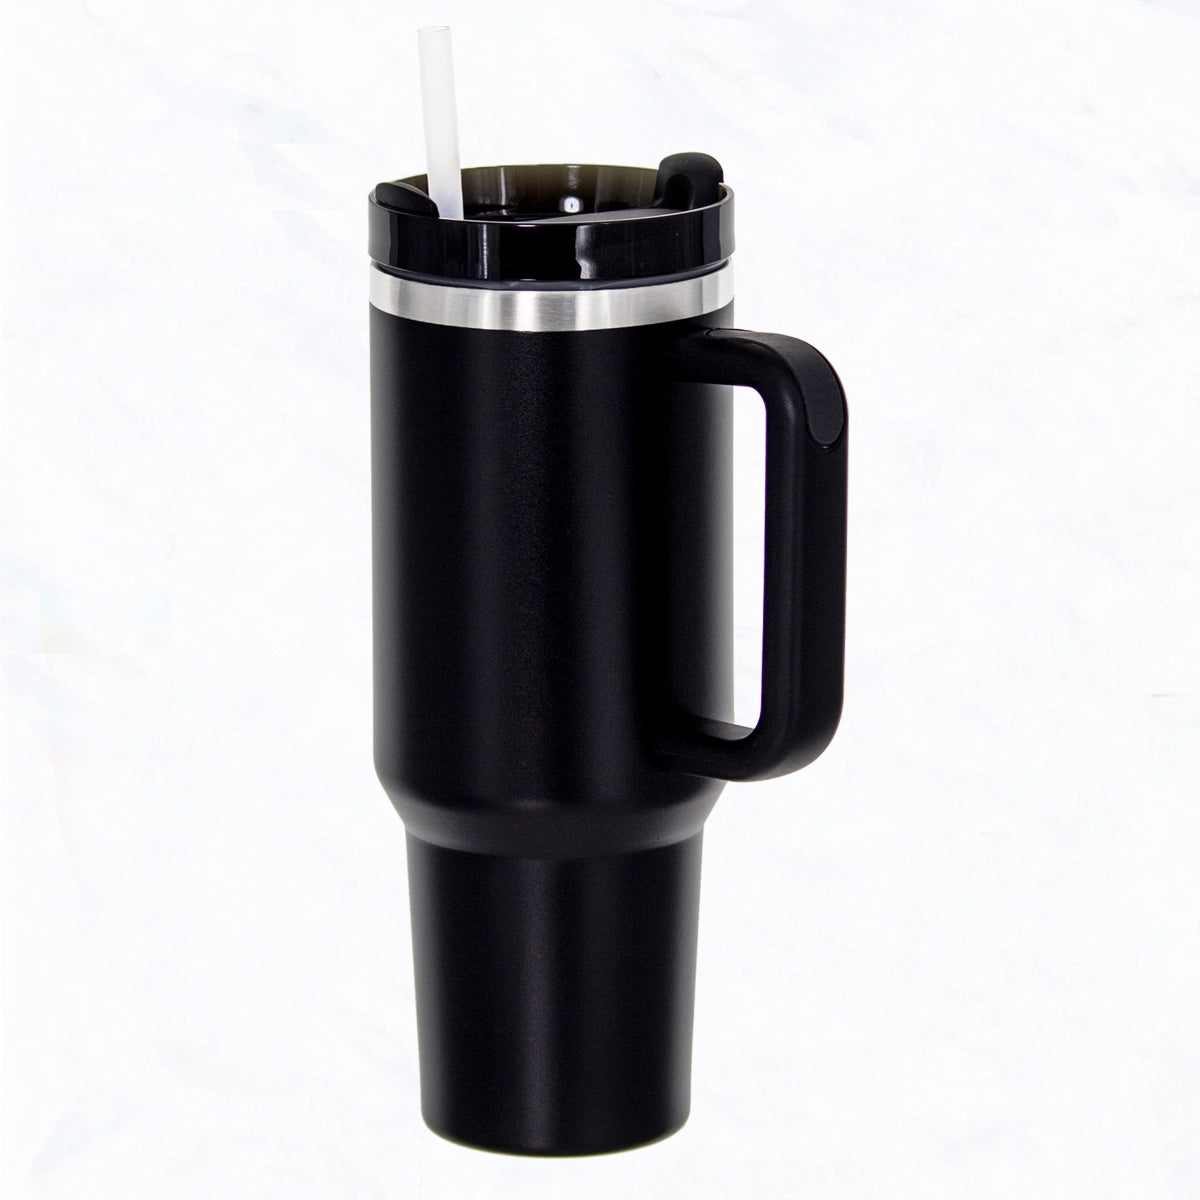 Navy Daisy Insulated Tumbler Cup with Handle